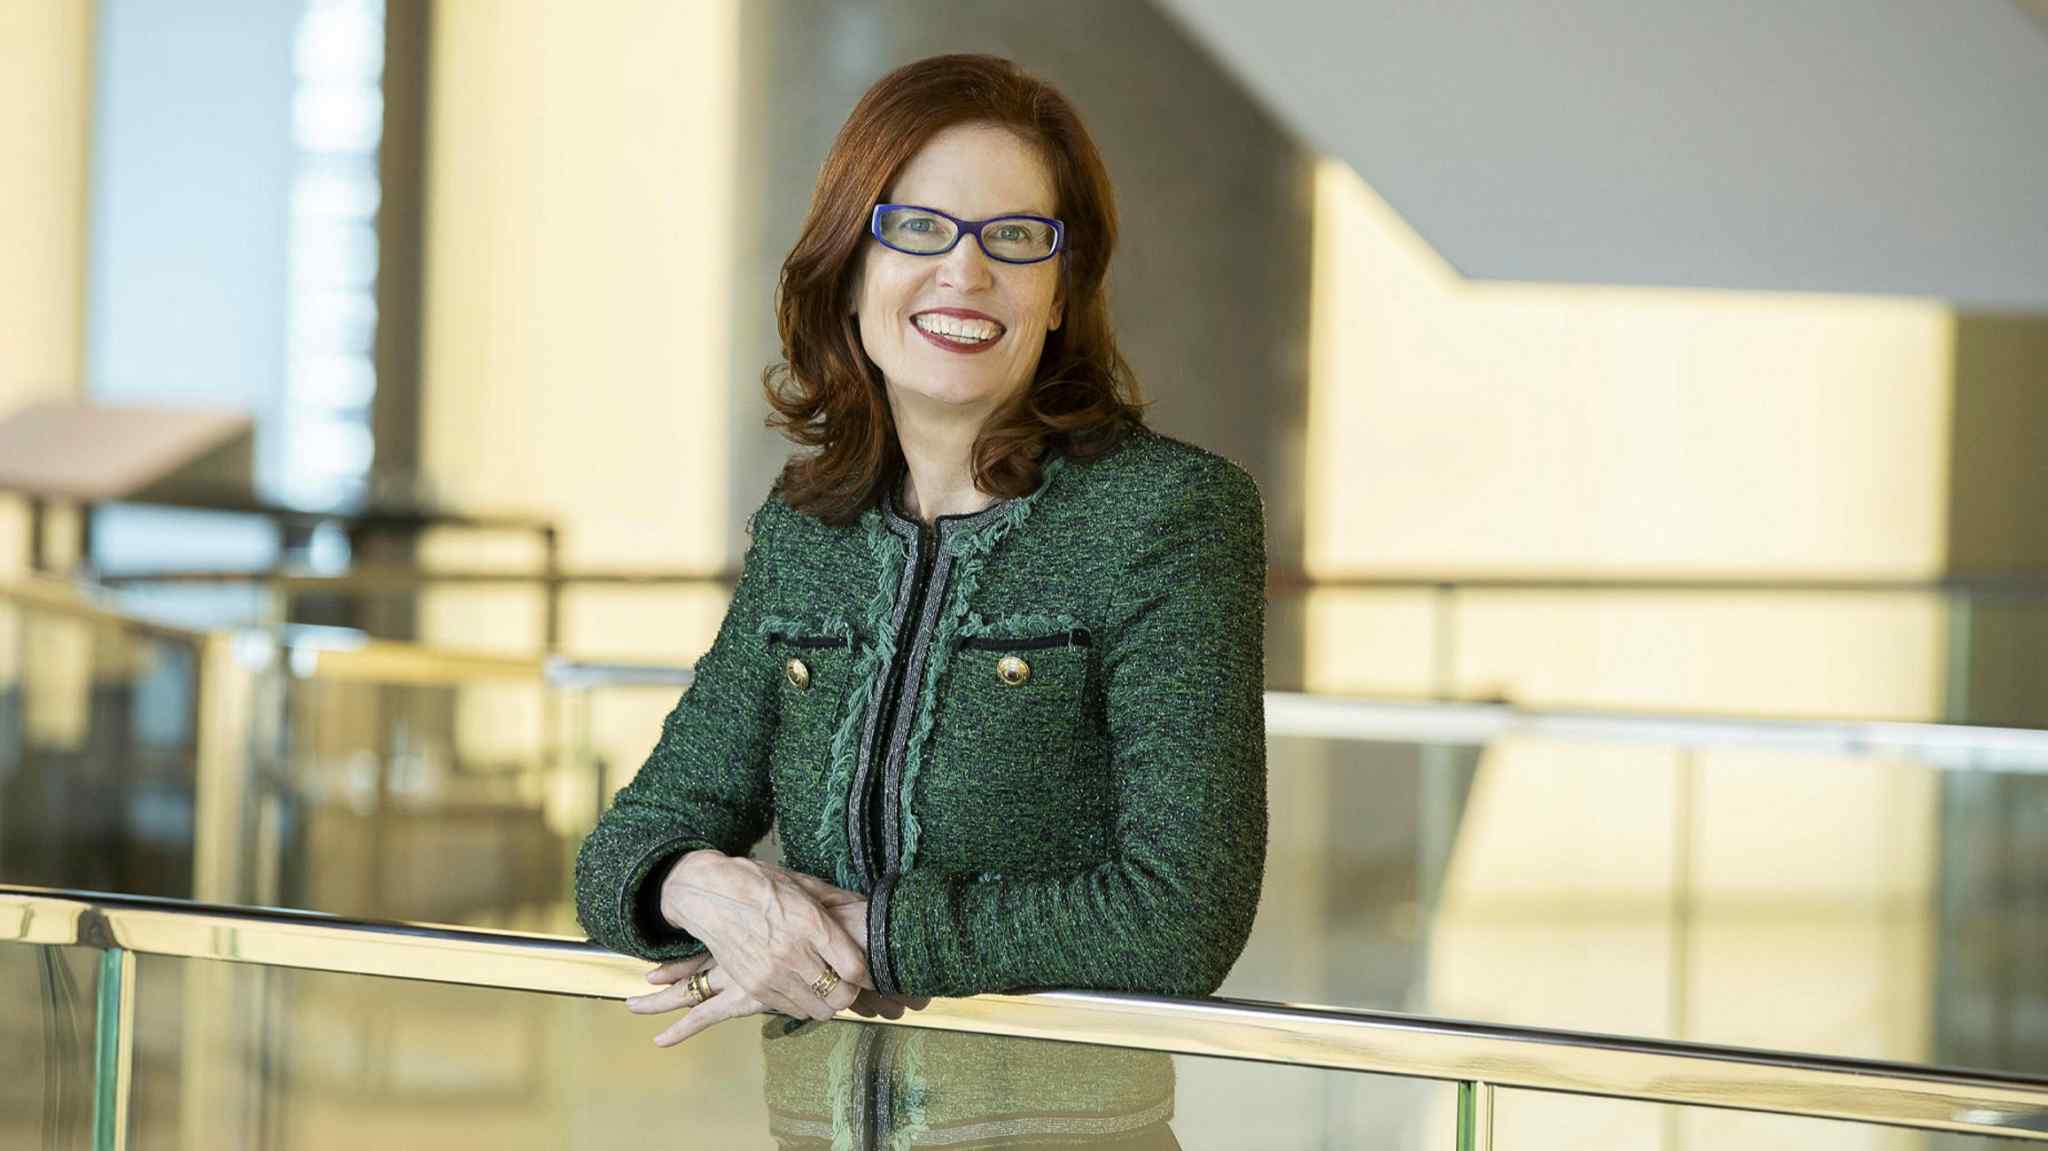 First female chair of Herbert Smith Freehills says flexible working made role attractive